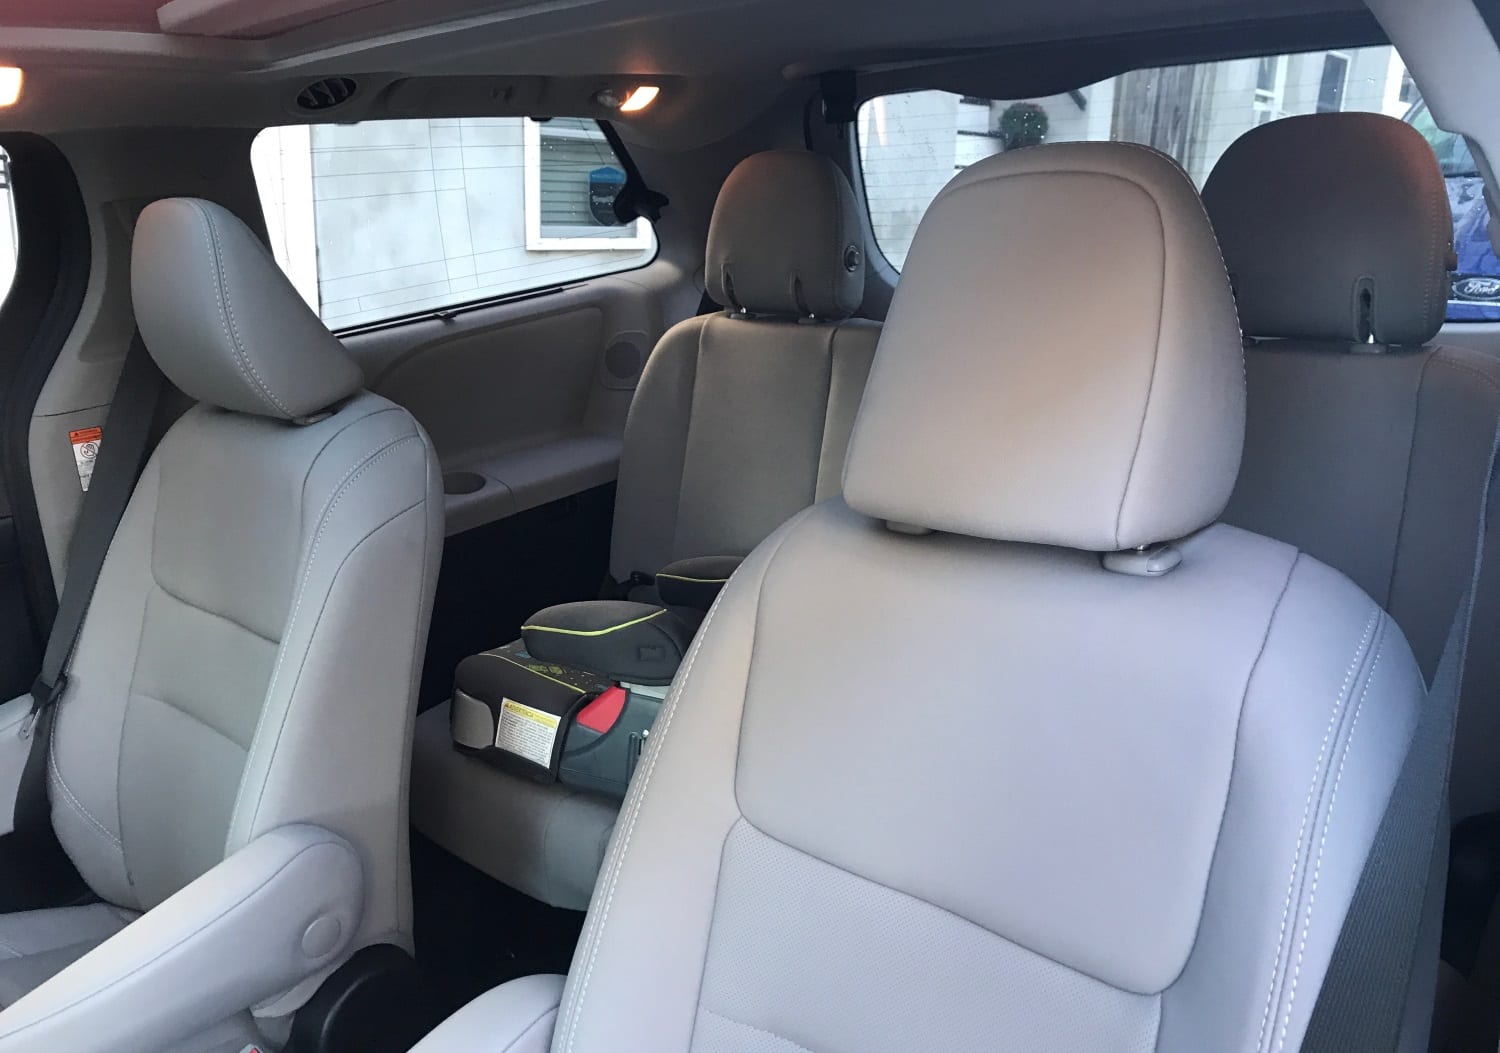 How to Adjust Ford F150 Headrest?